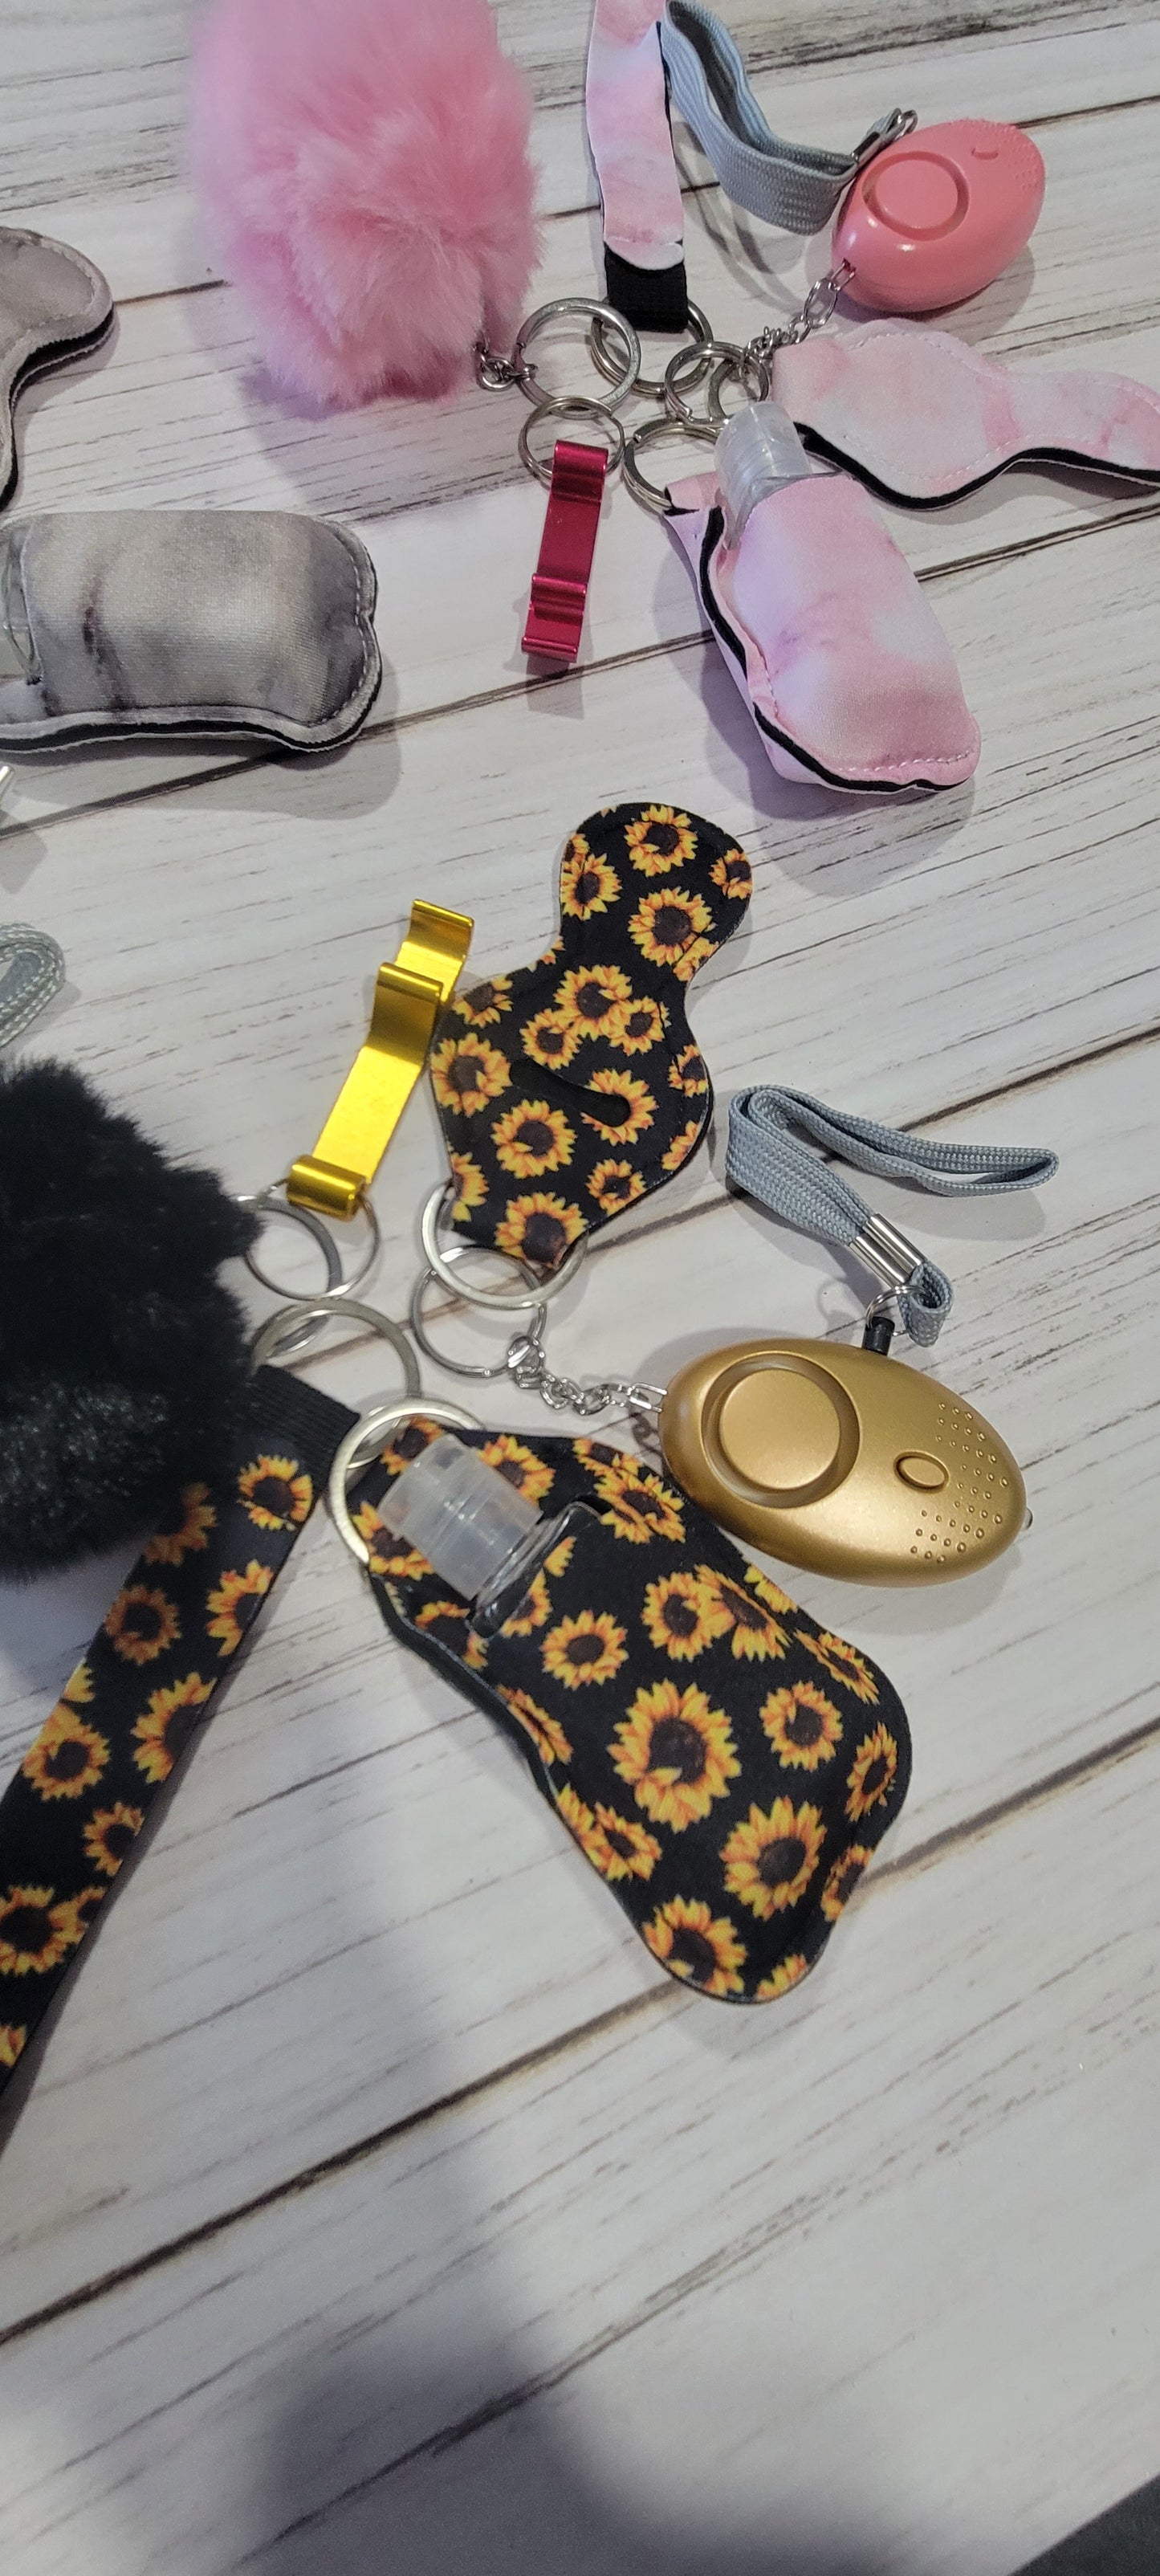 Personalized Self Defense Key Chain. Make your own!